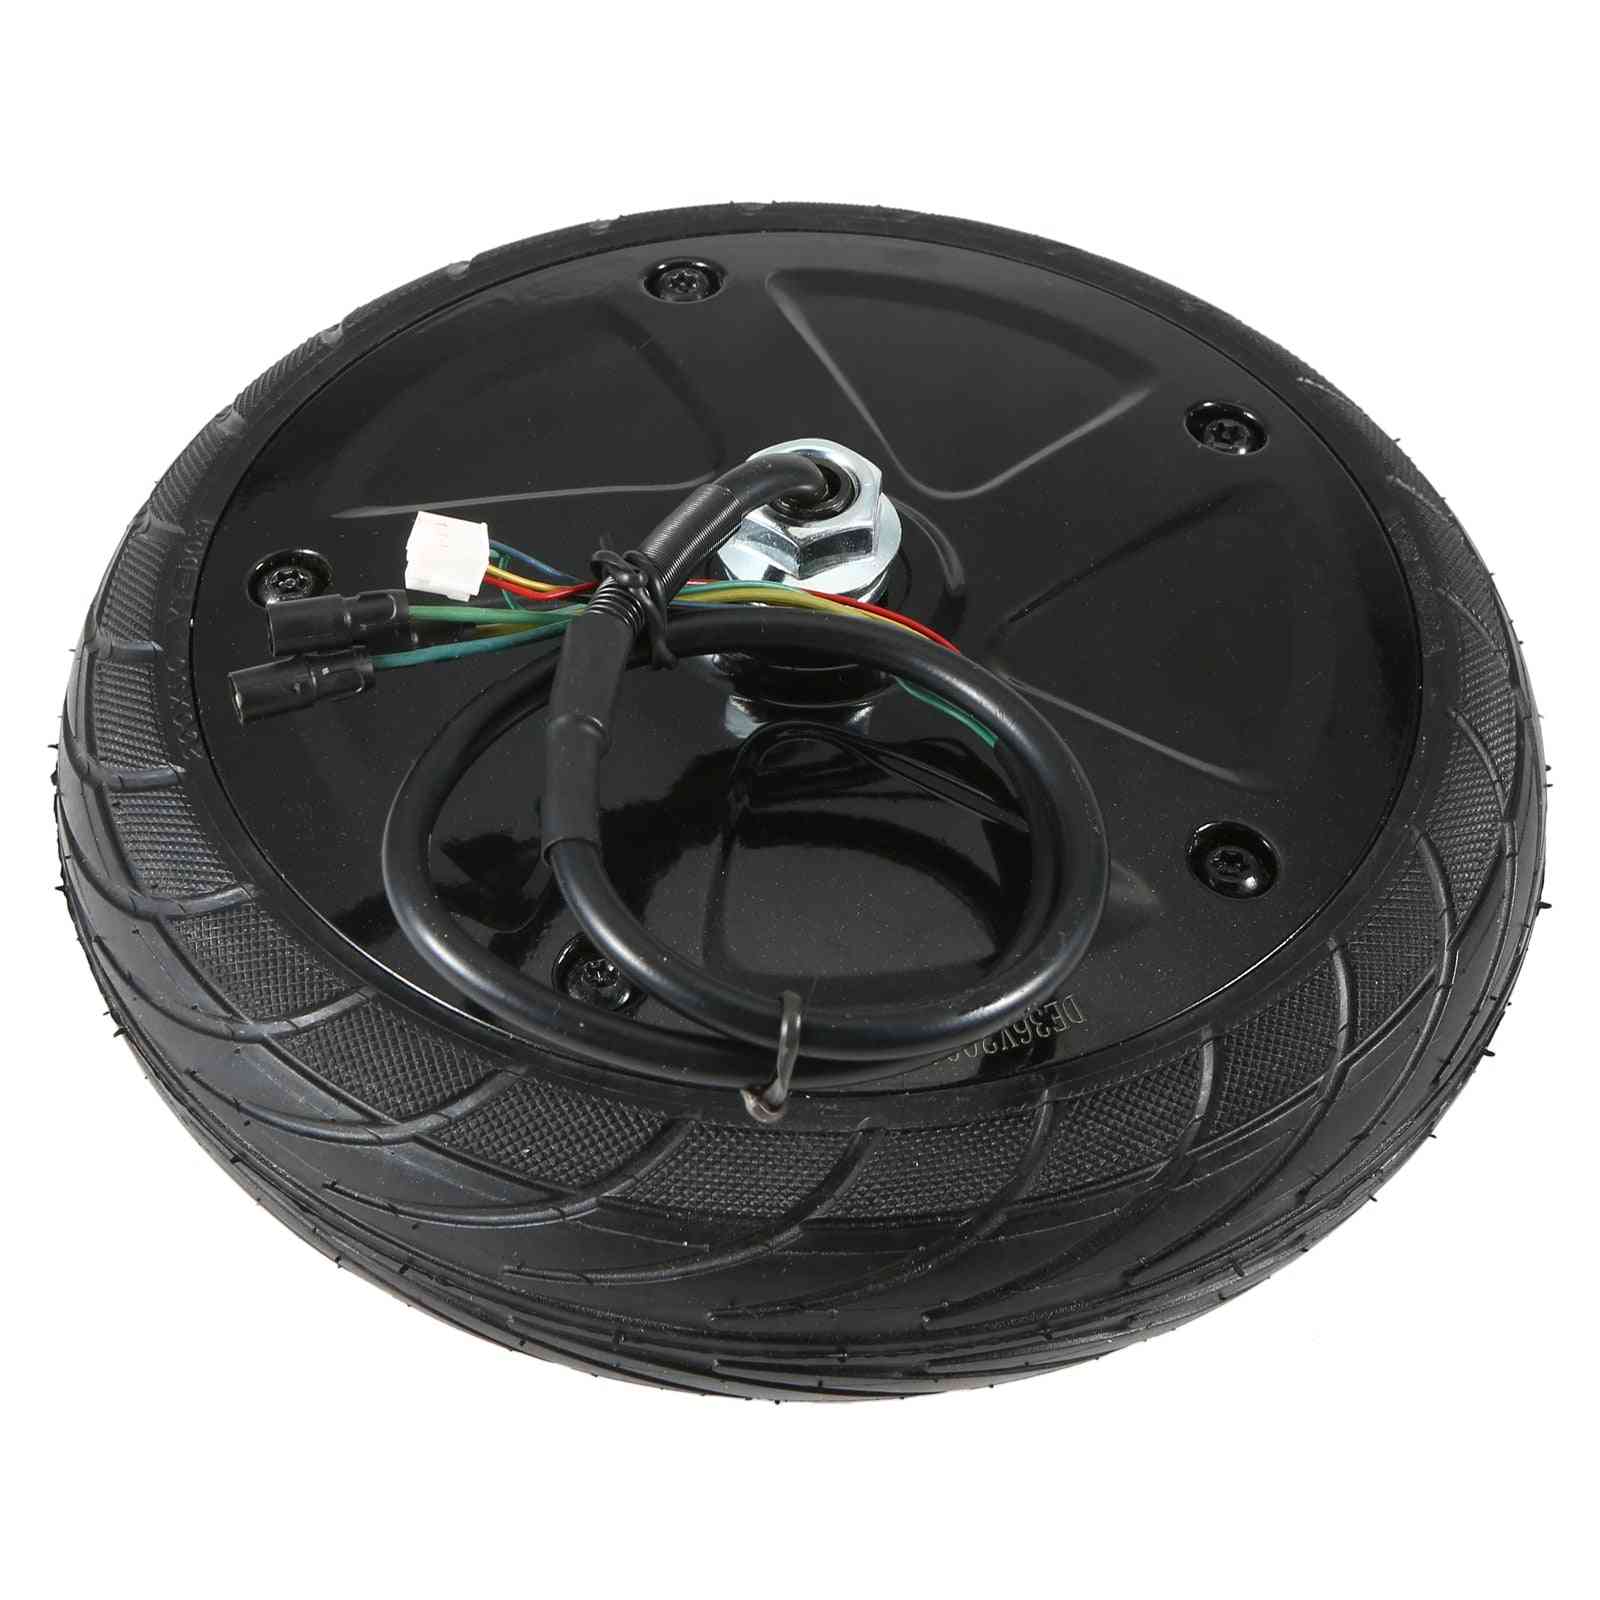 Motor Engine Wheel For Electric Scooter Front Driving Wheel Tire